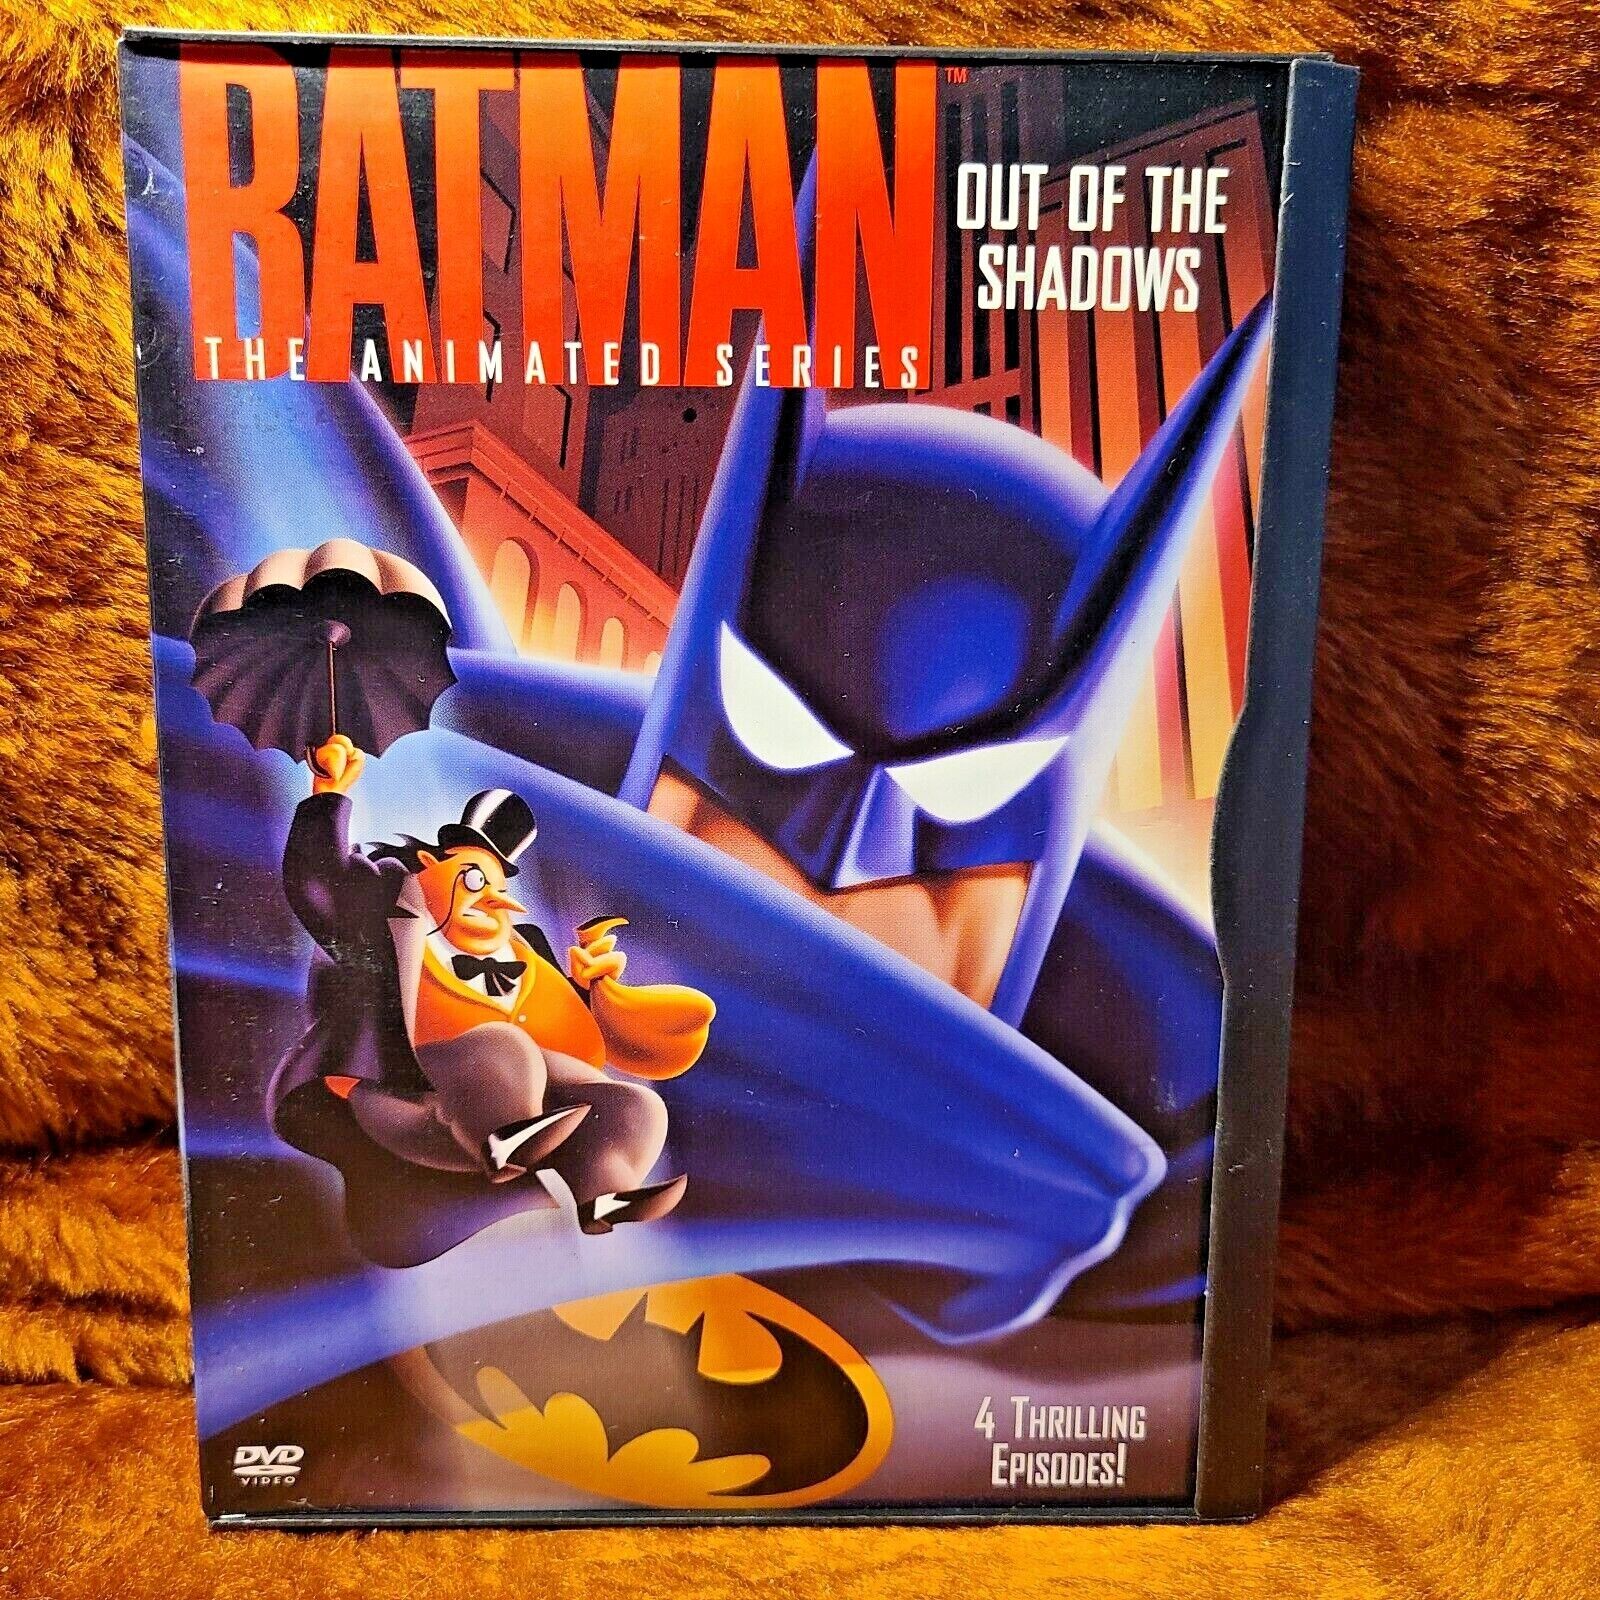 Batman The Animated Series - Out of the Shadows 4 Thrilling Episodes ~DVD  ✂️ | eBay